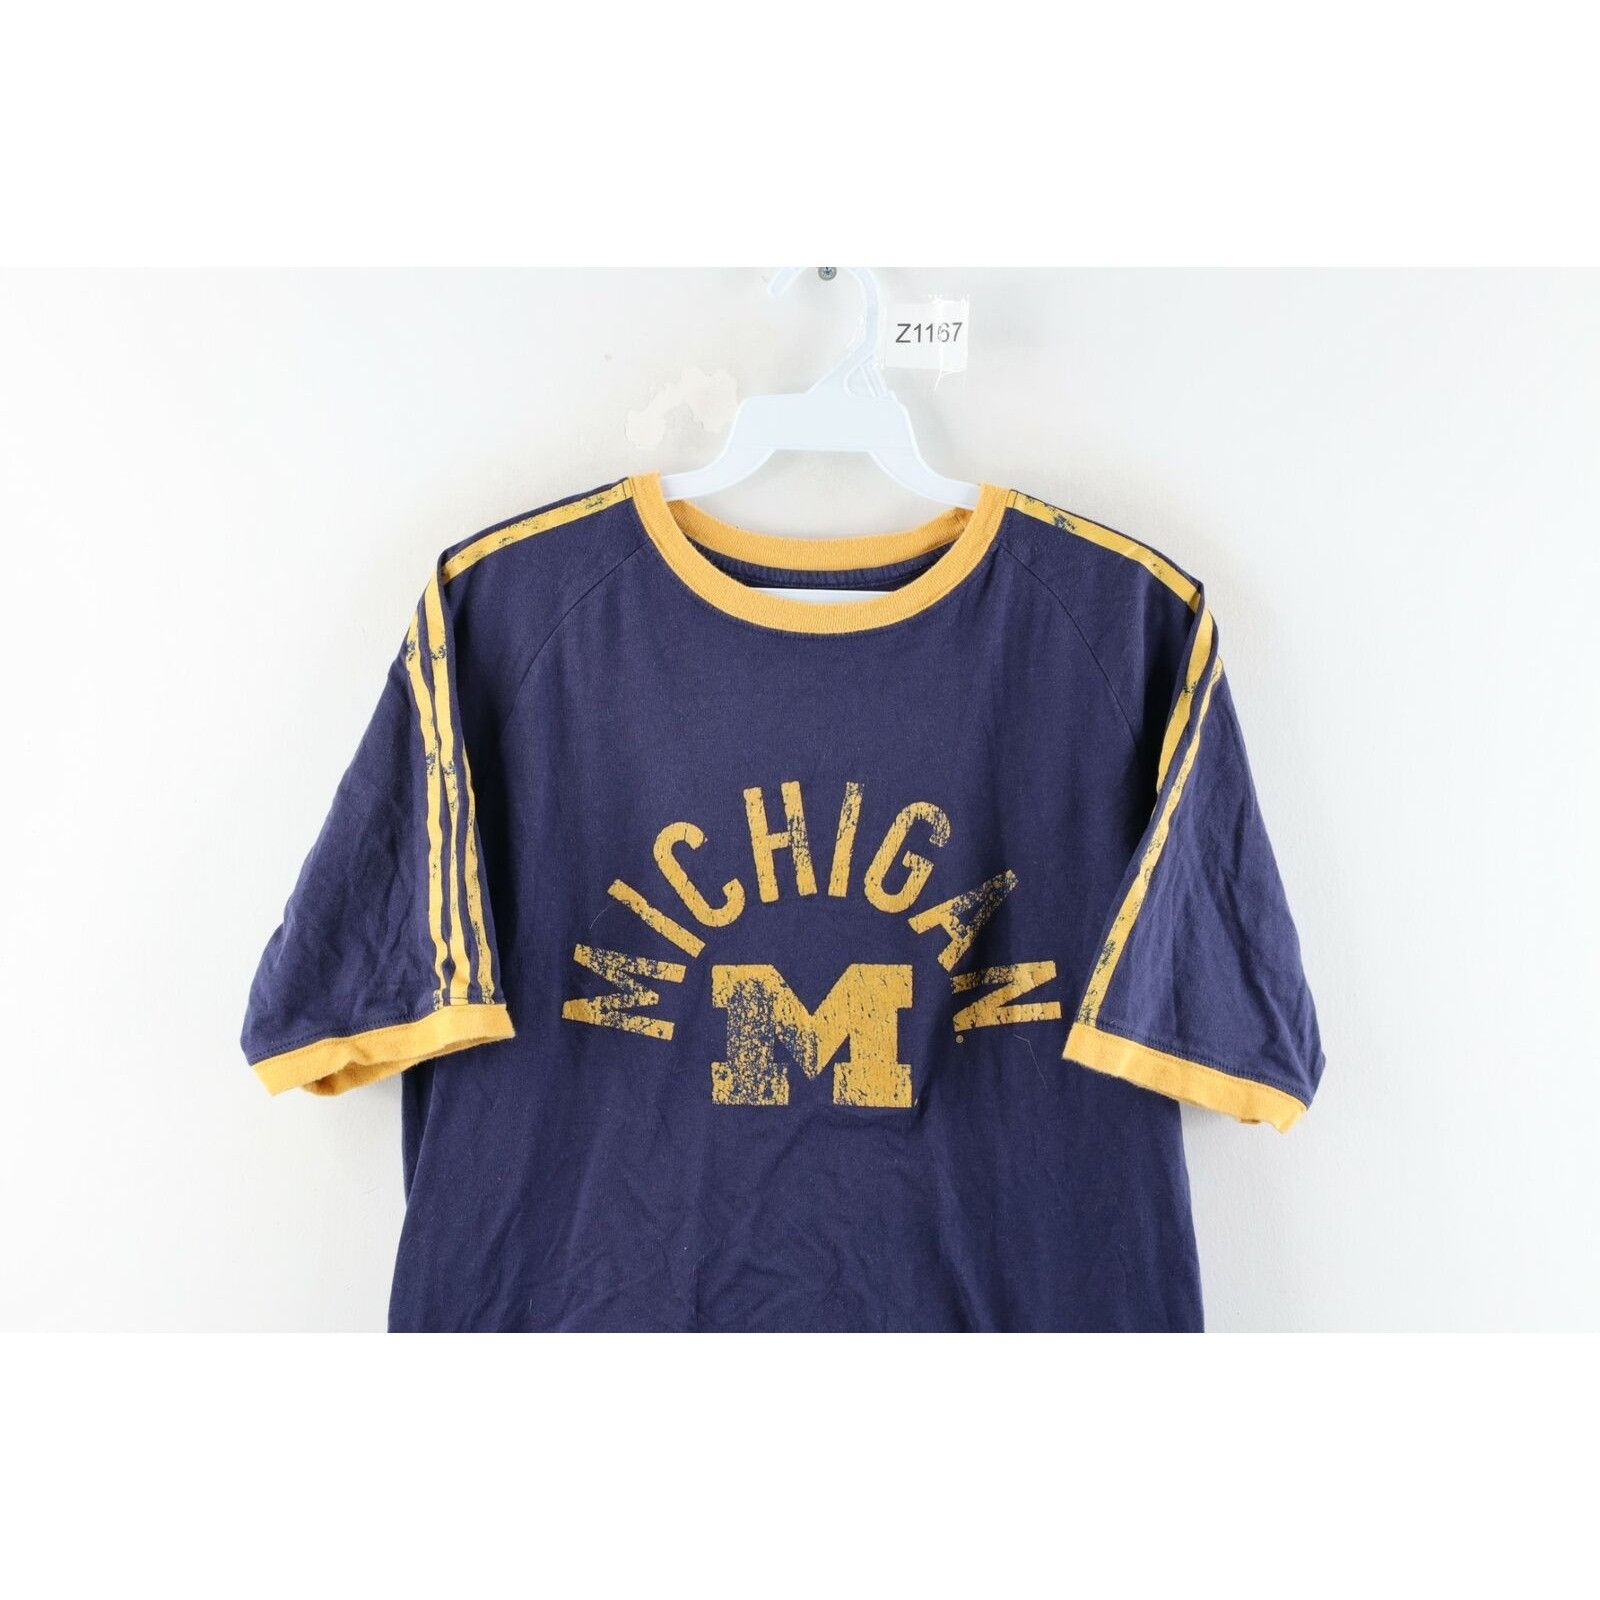 Adidas Adidas Retro University of Michigan Spell Out Ringer T-Shirt Size US S / EU 44-46 / 1 - 2 Preview